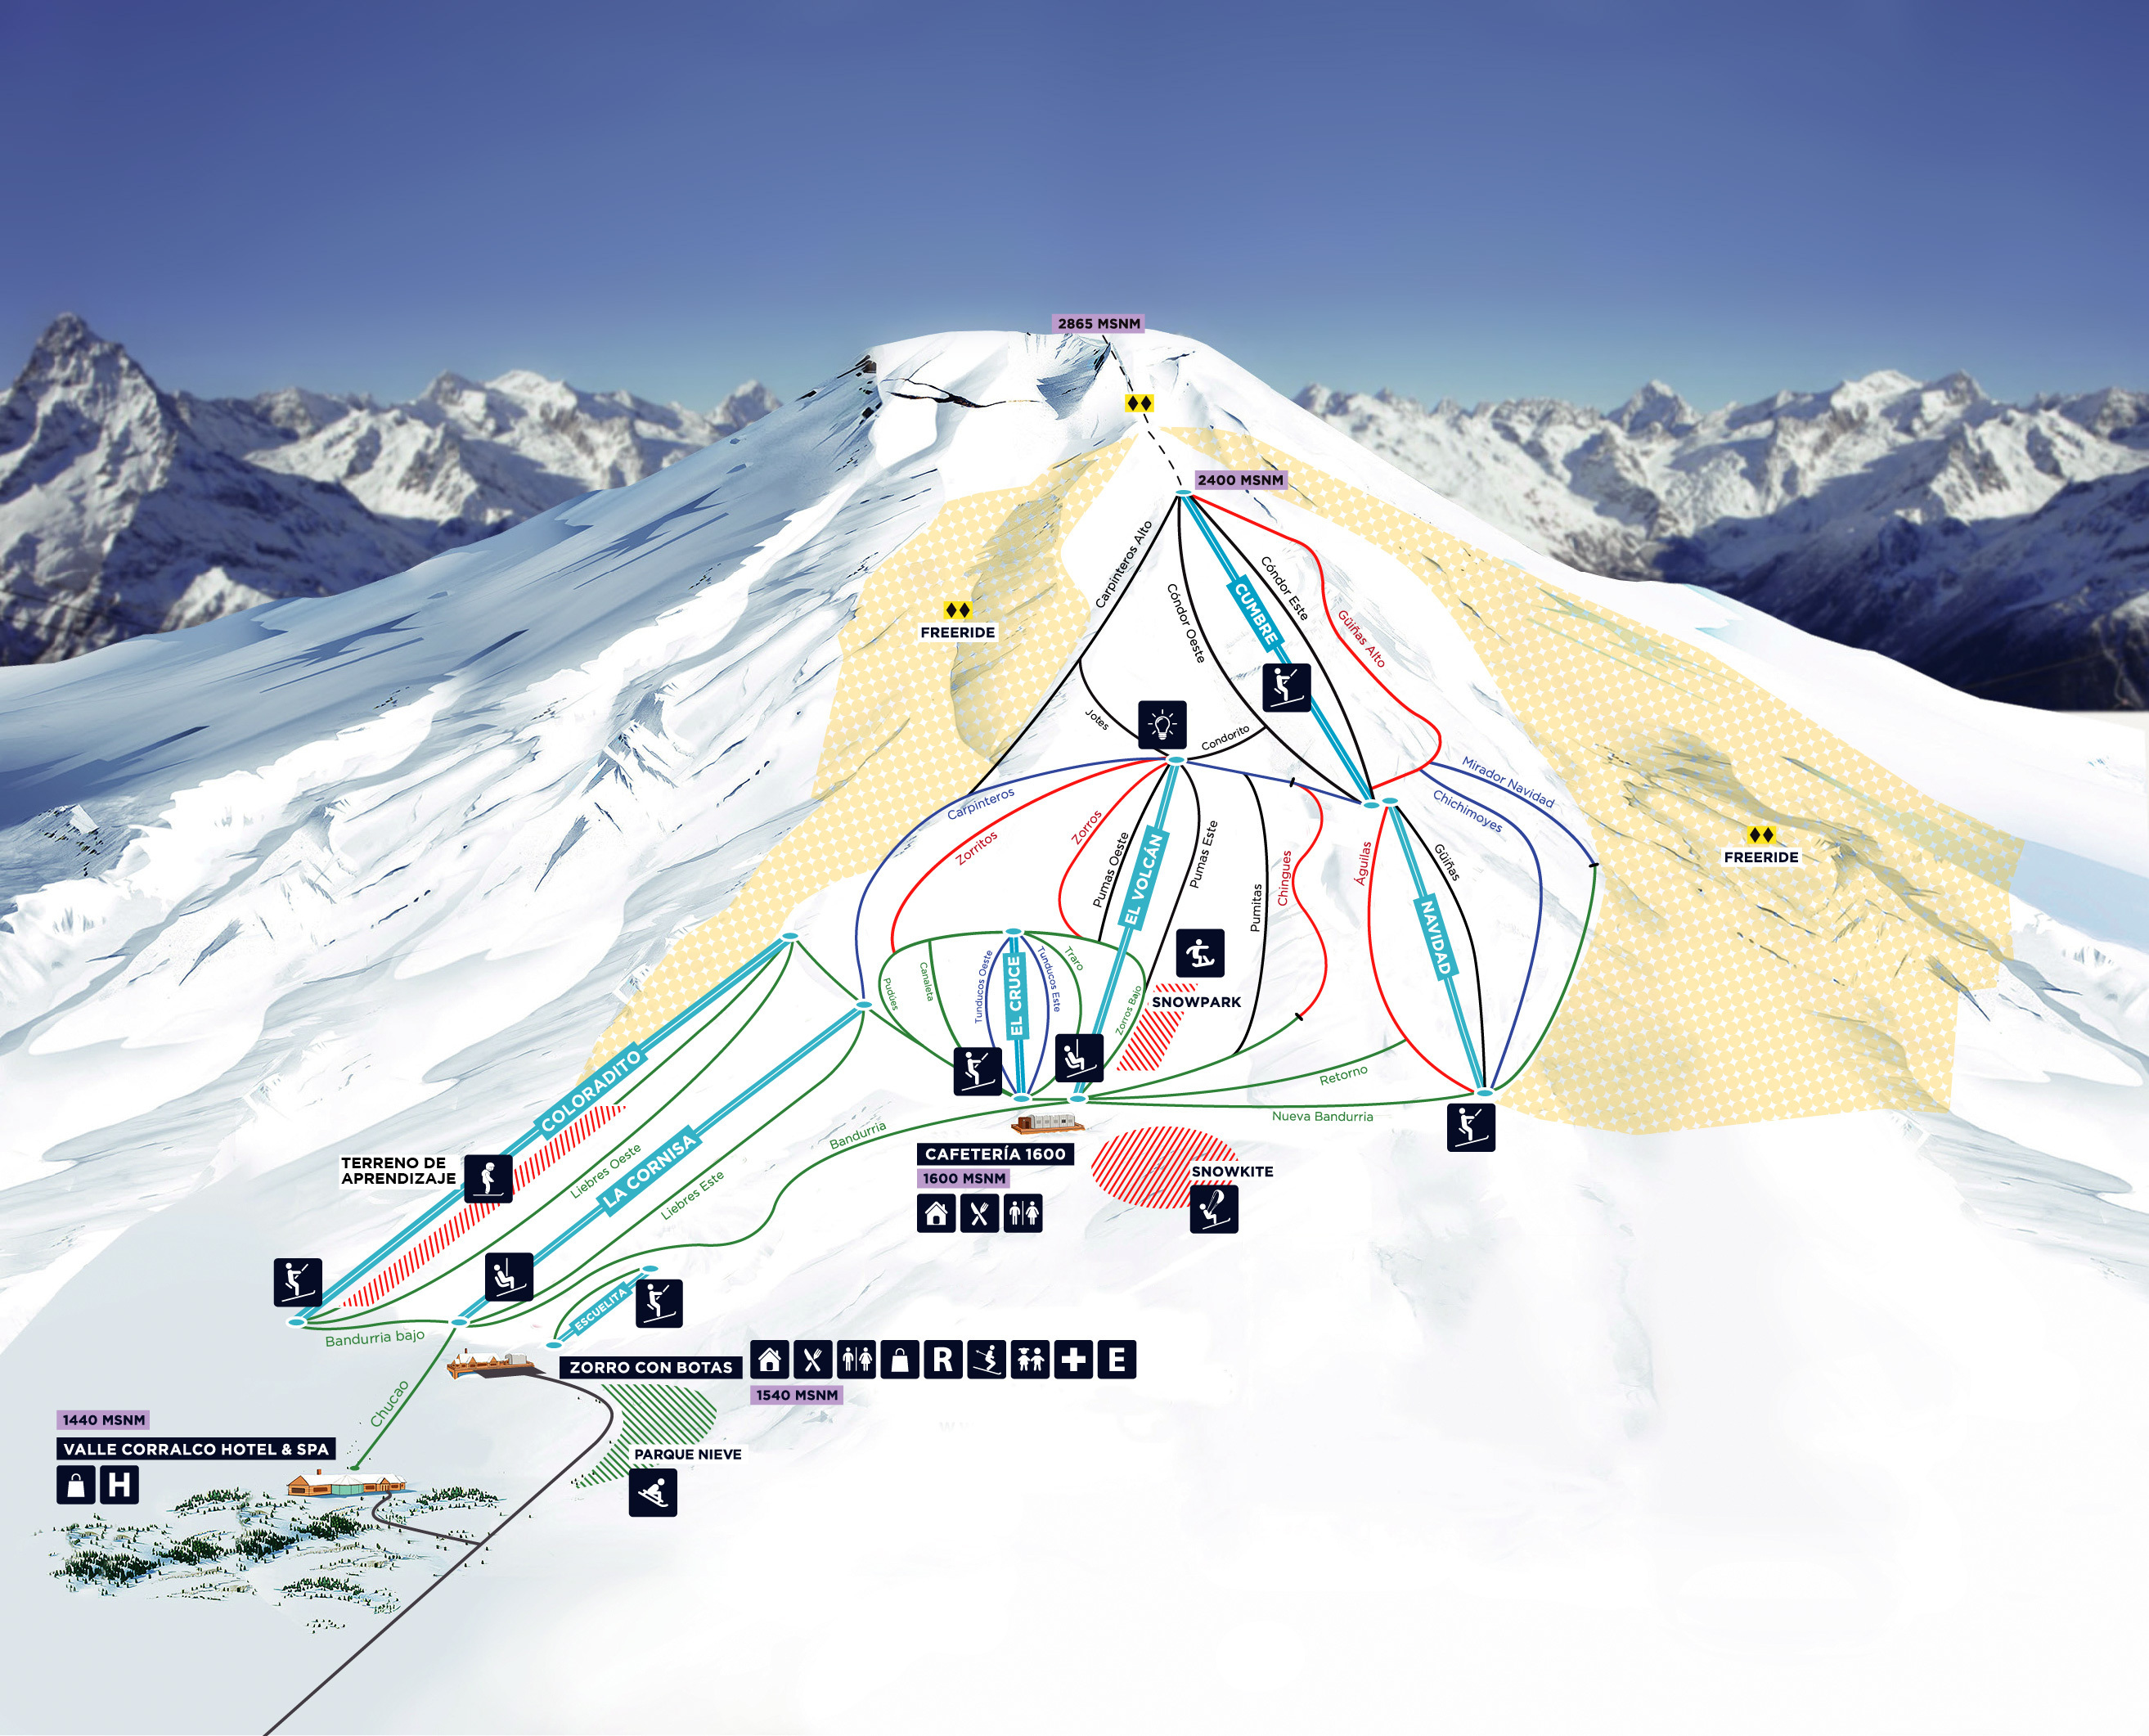 Corralco (Lonquimay) Piste / Trail Map